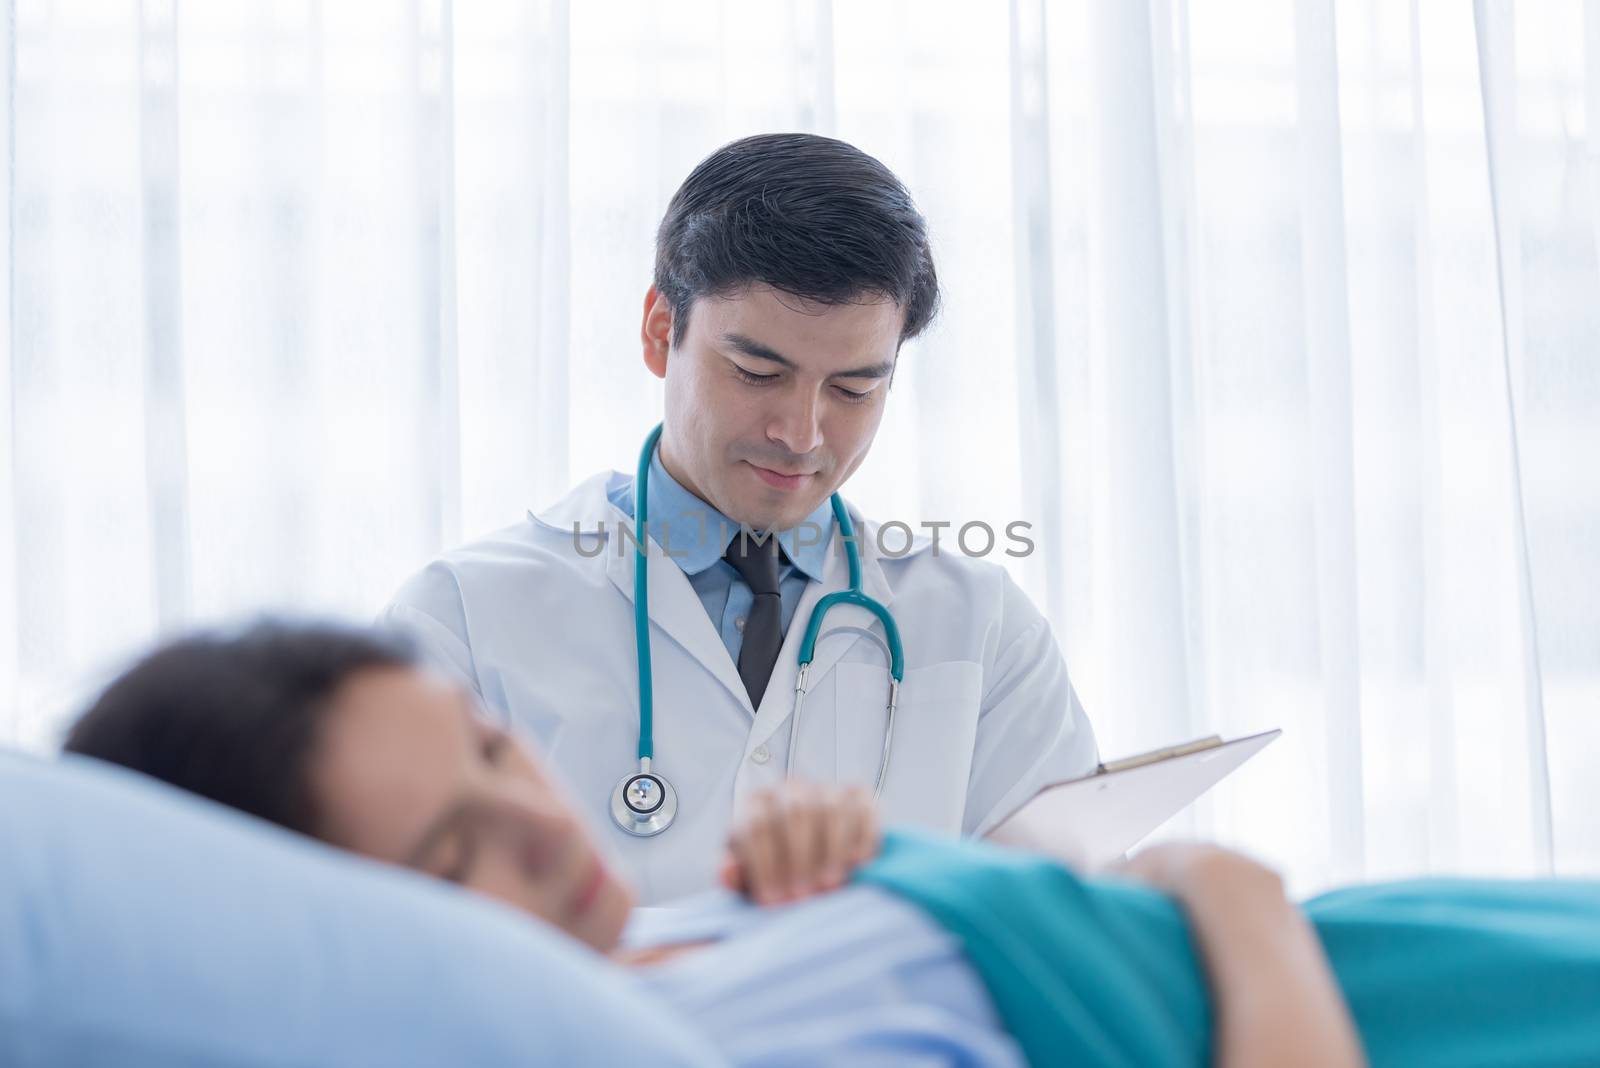 A doctor take care of sick patient woman at the hospital or medi by animagesdesign